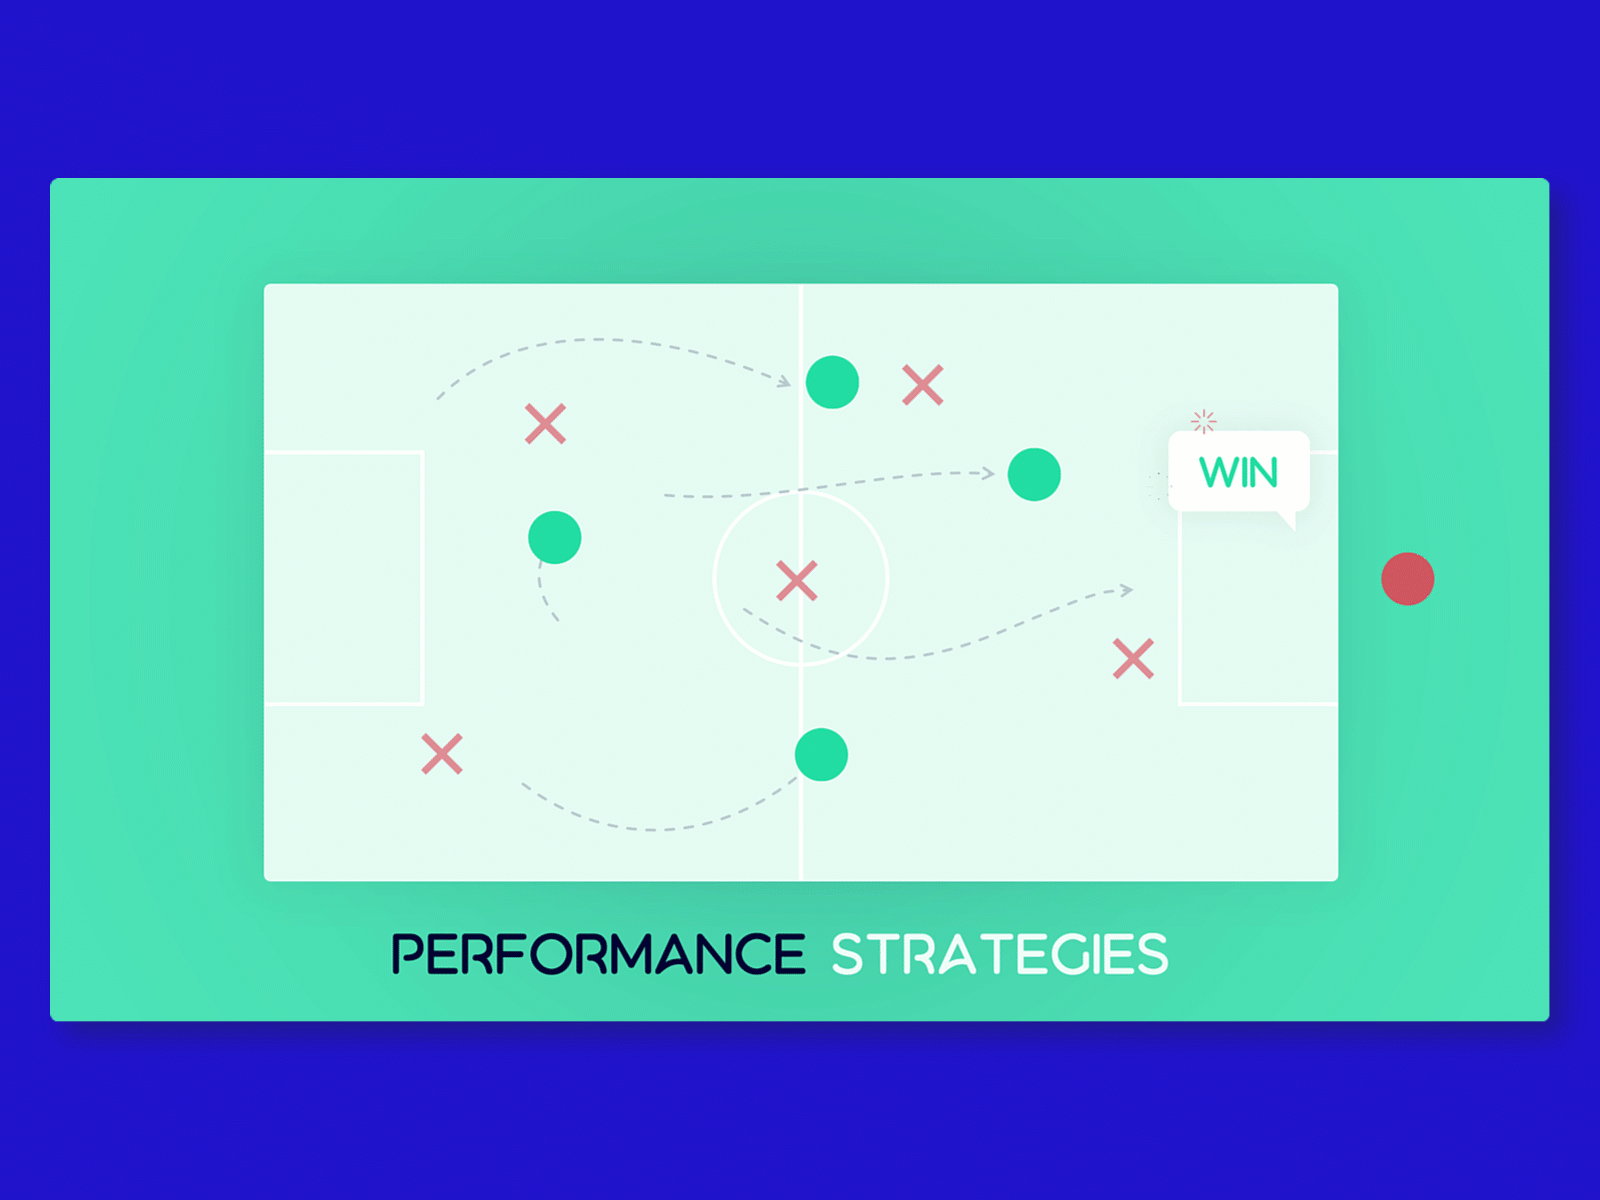 PowerPoint animated Slide - Performance Strategy - Part 2